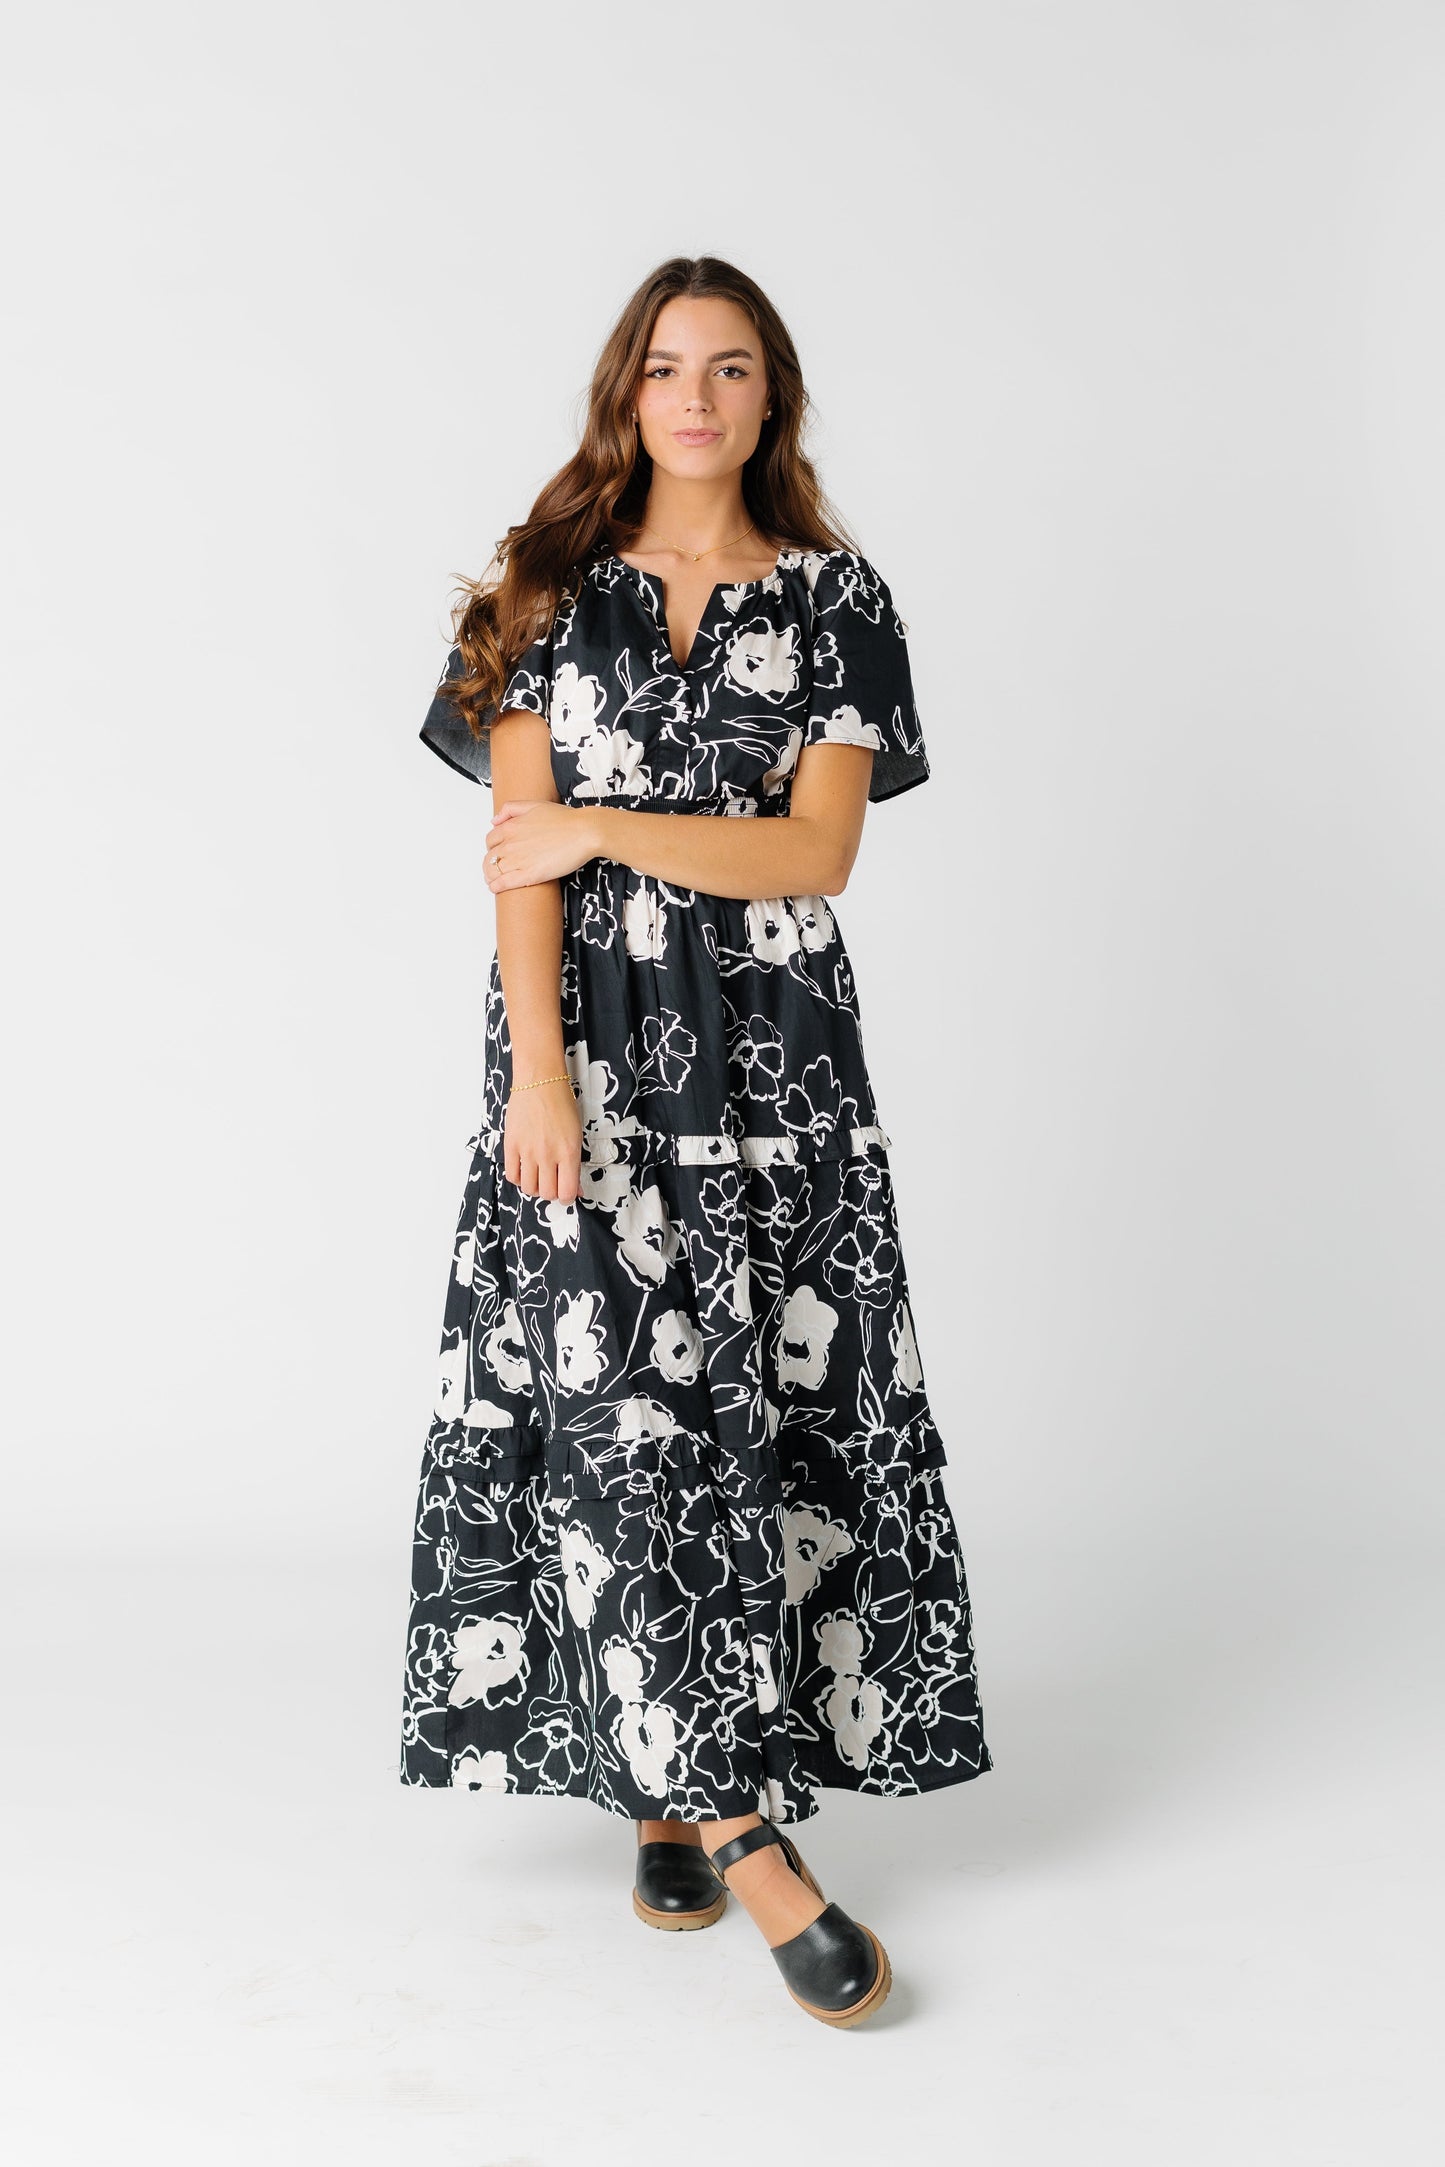 The Fable Tiered Maxi Dress WOMEN'S DRESS Sugarlips 